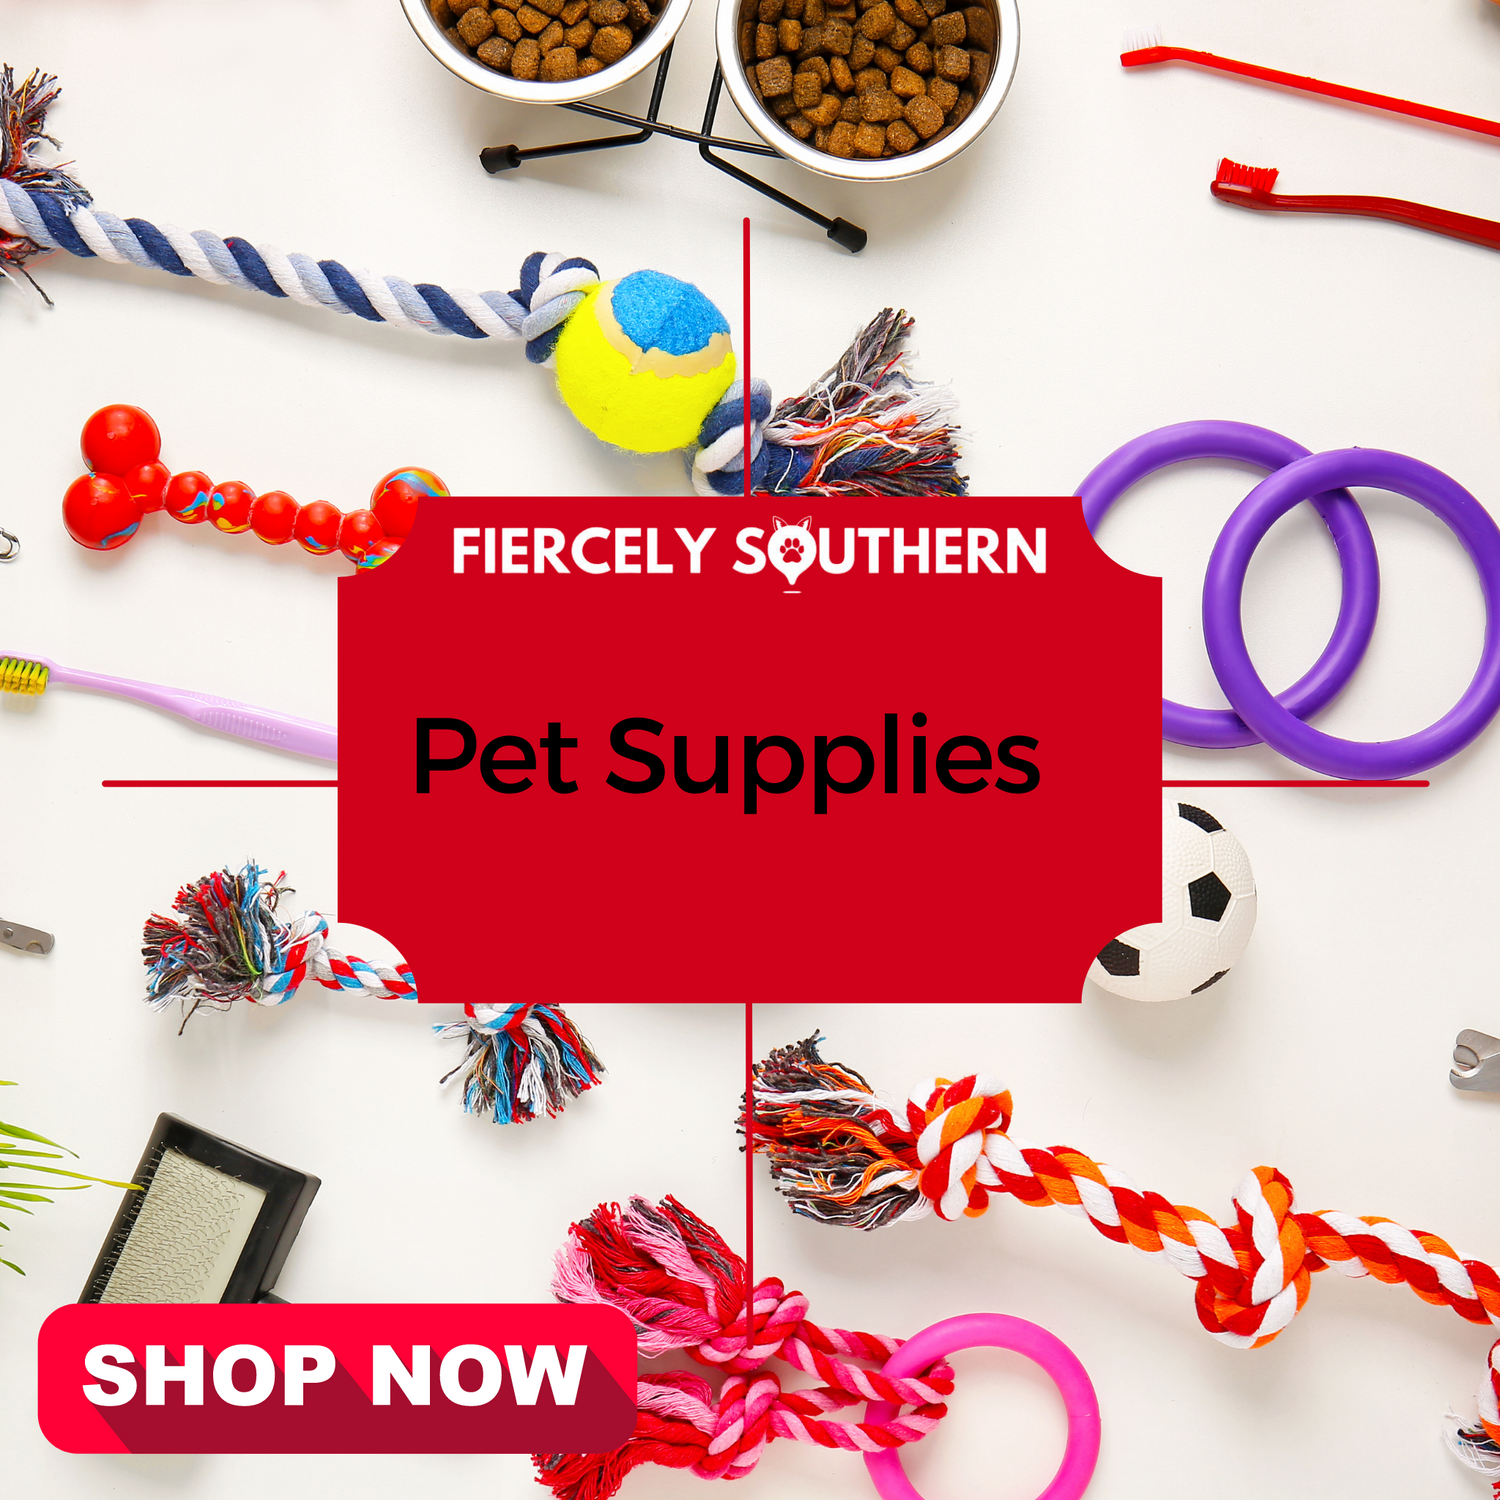 Pet Supplies - Fiercely Southern